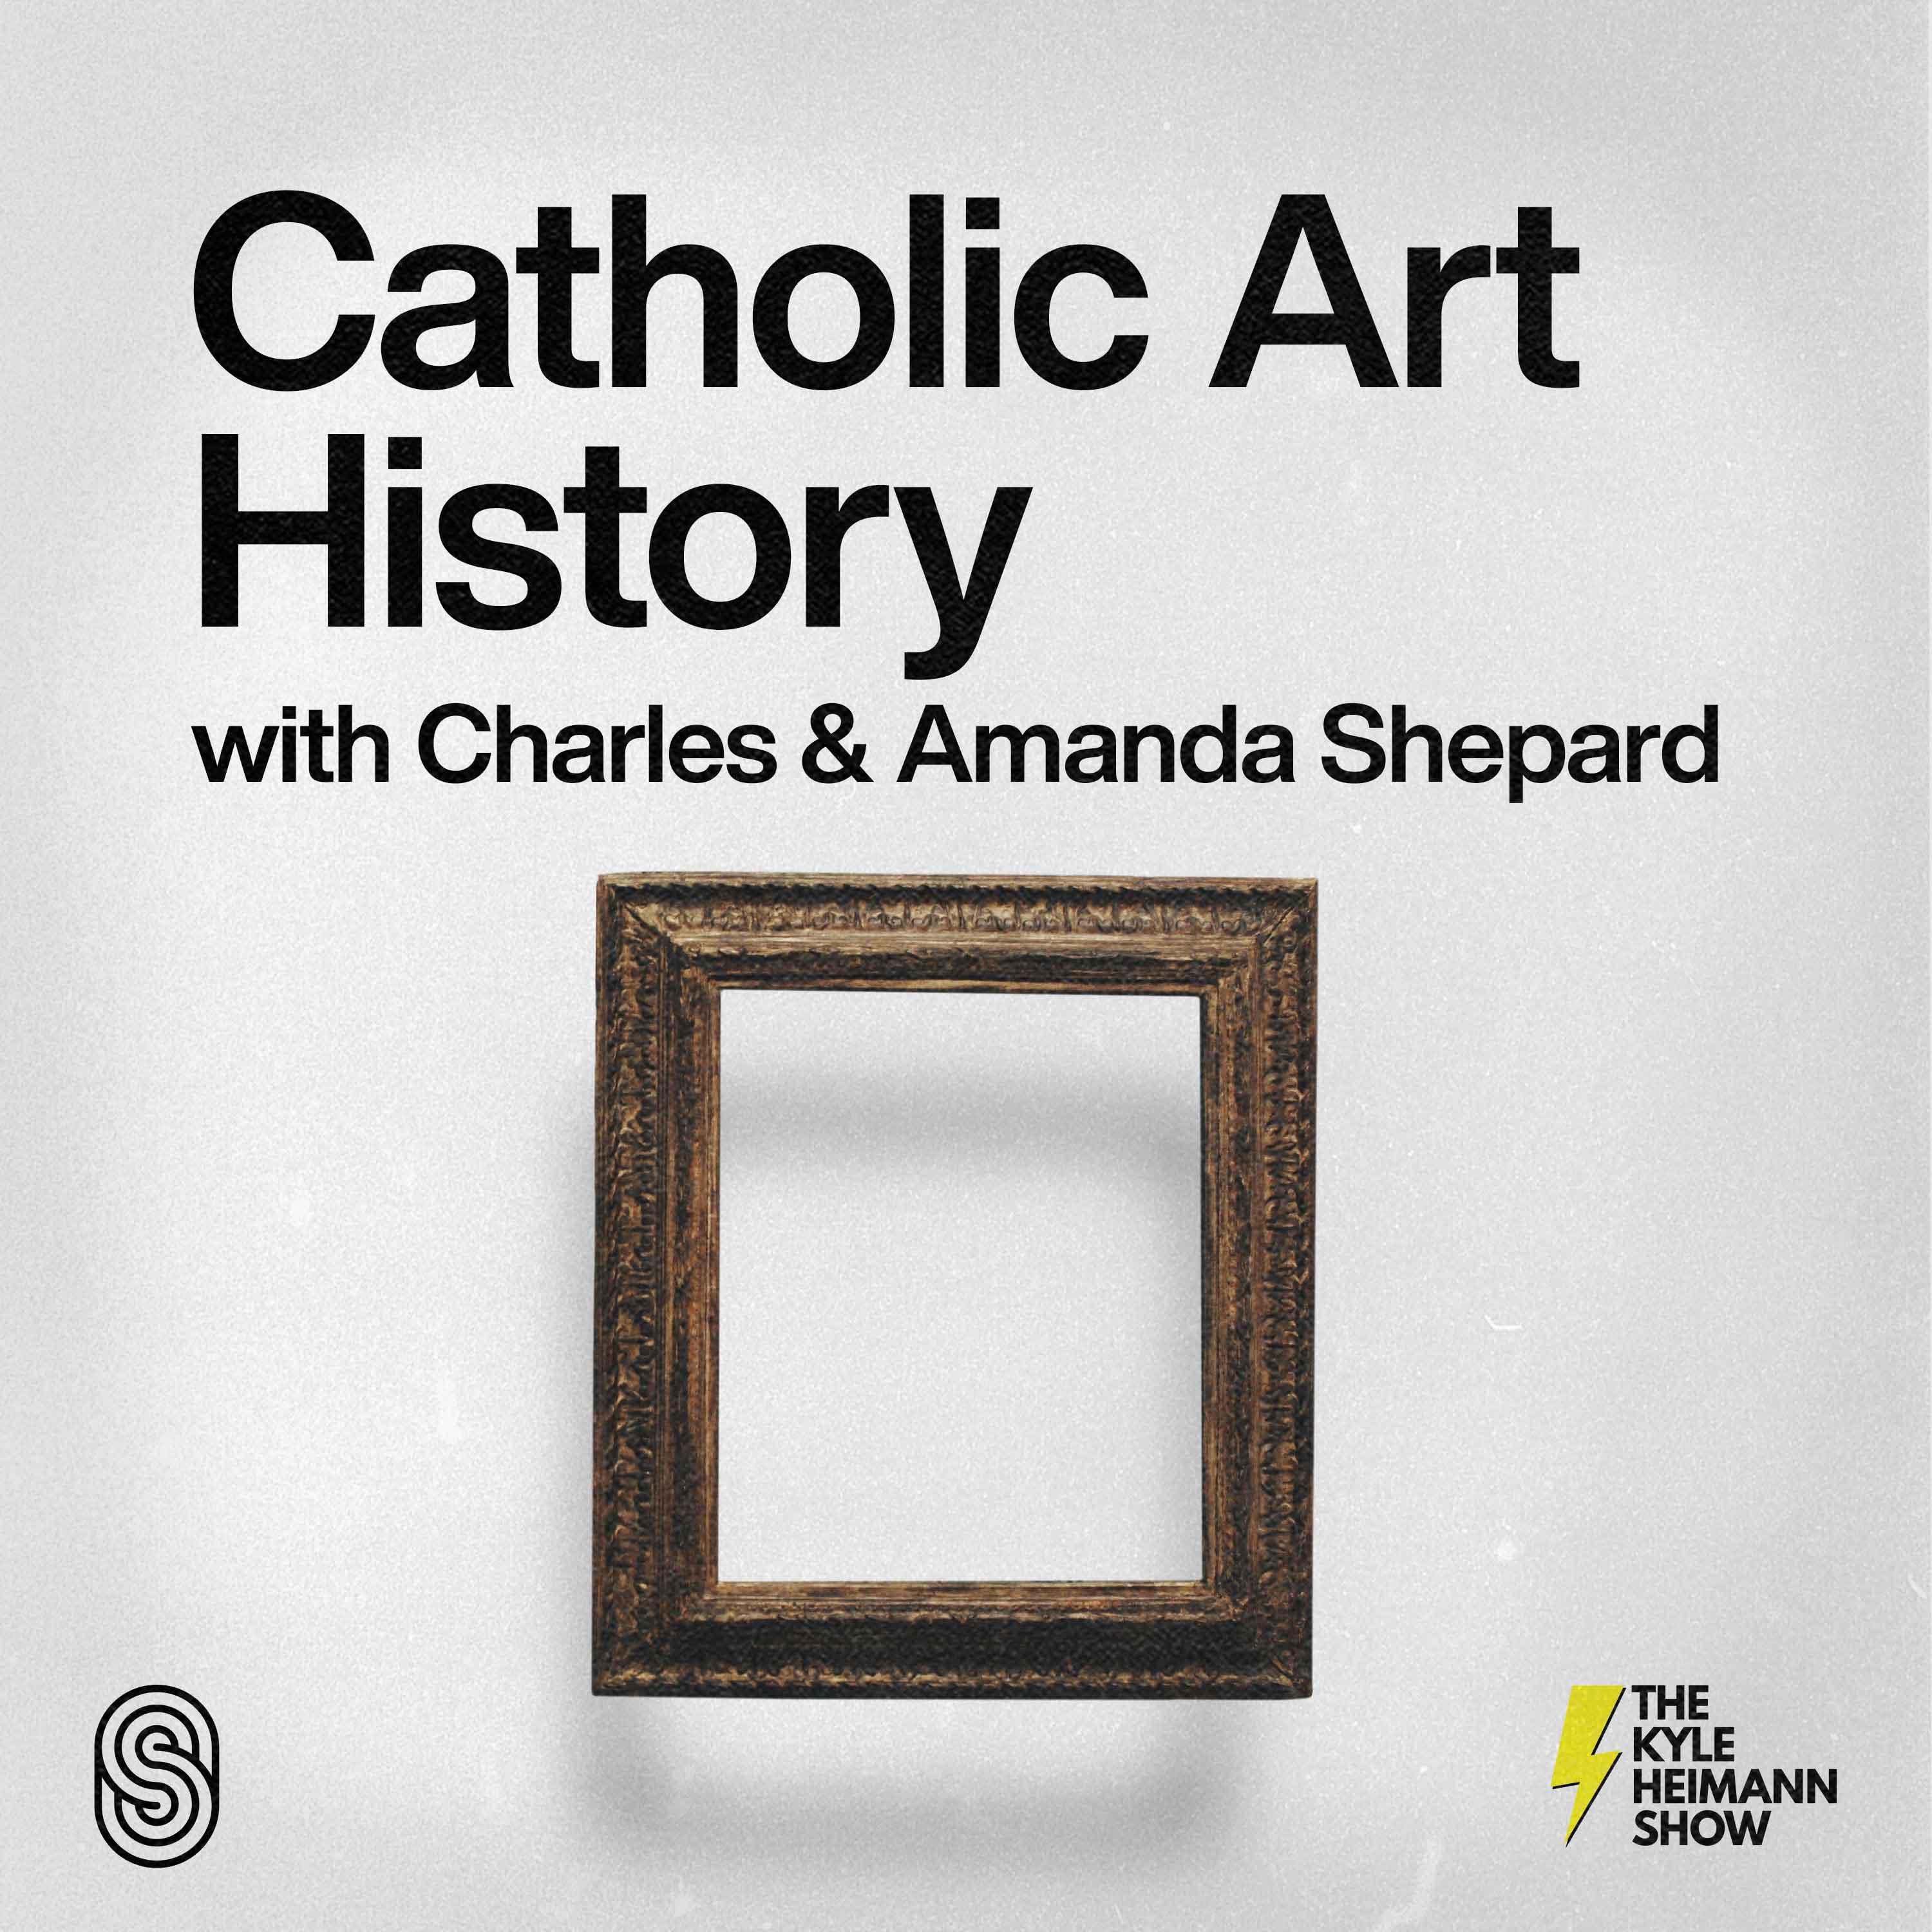 Catholic Art History - With Charles and Amanda Shepard - The Kyle Heimann Show